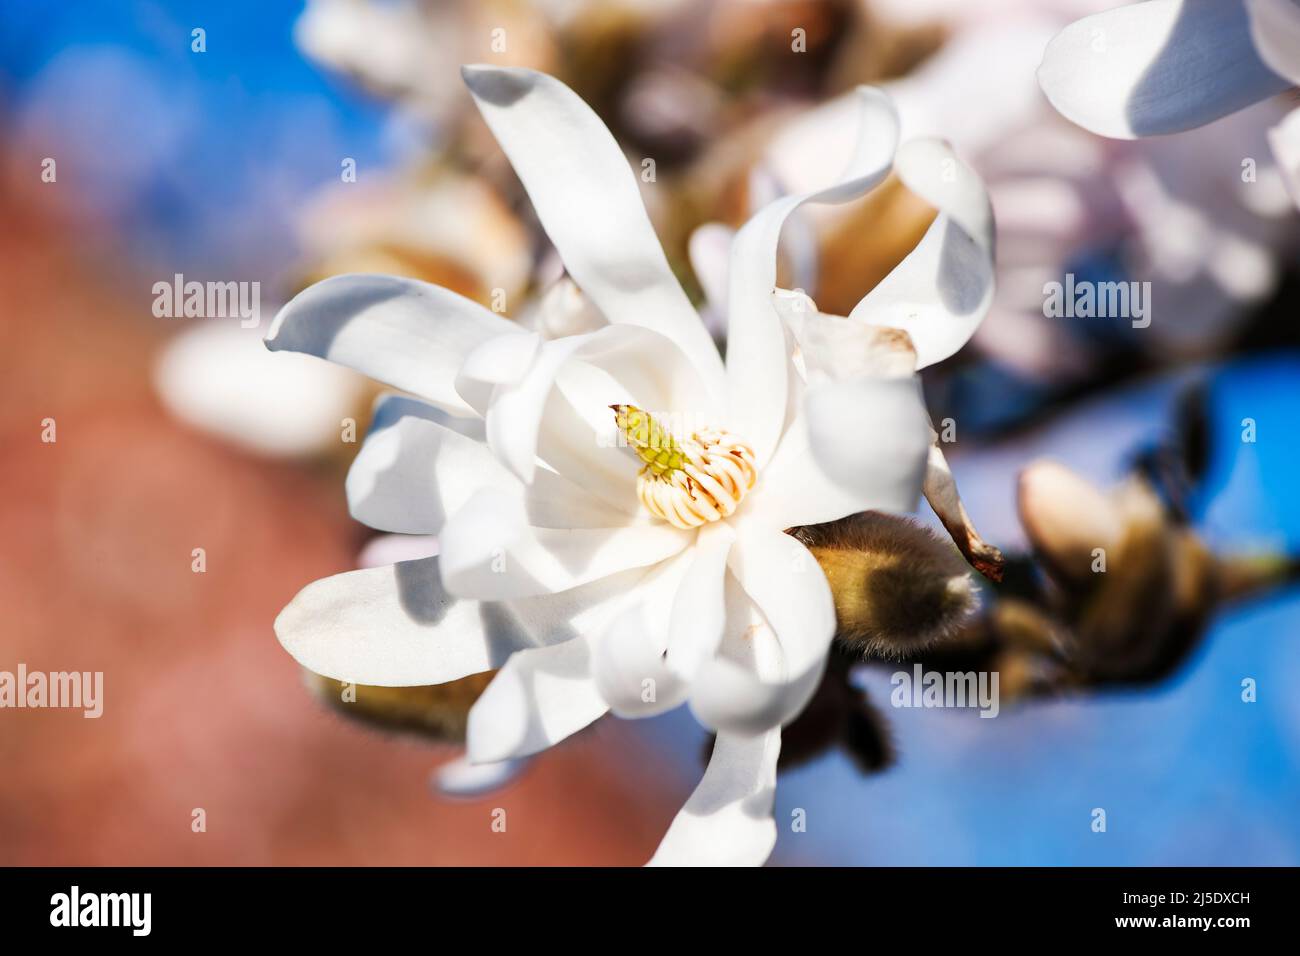 Close-up side view of a wide open white star magnolia blossom (lat: Magnolia stellata) in focus against a blurred background on the tree. Stock Photo